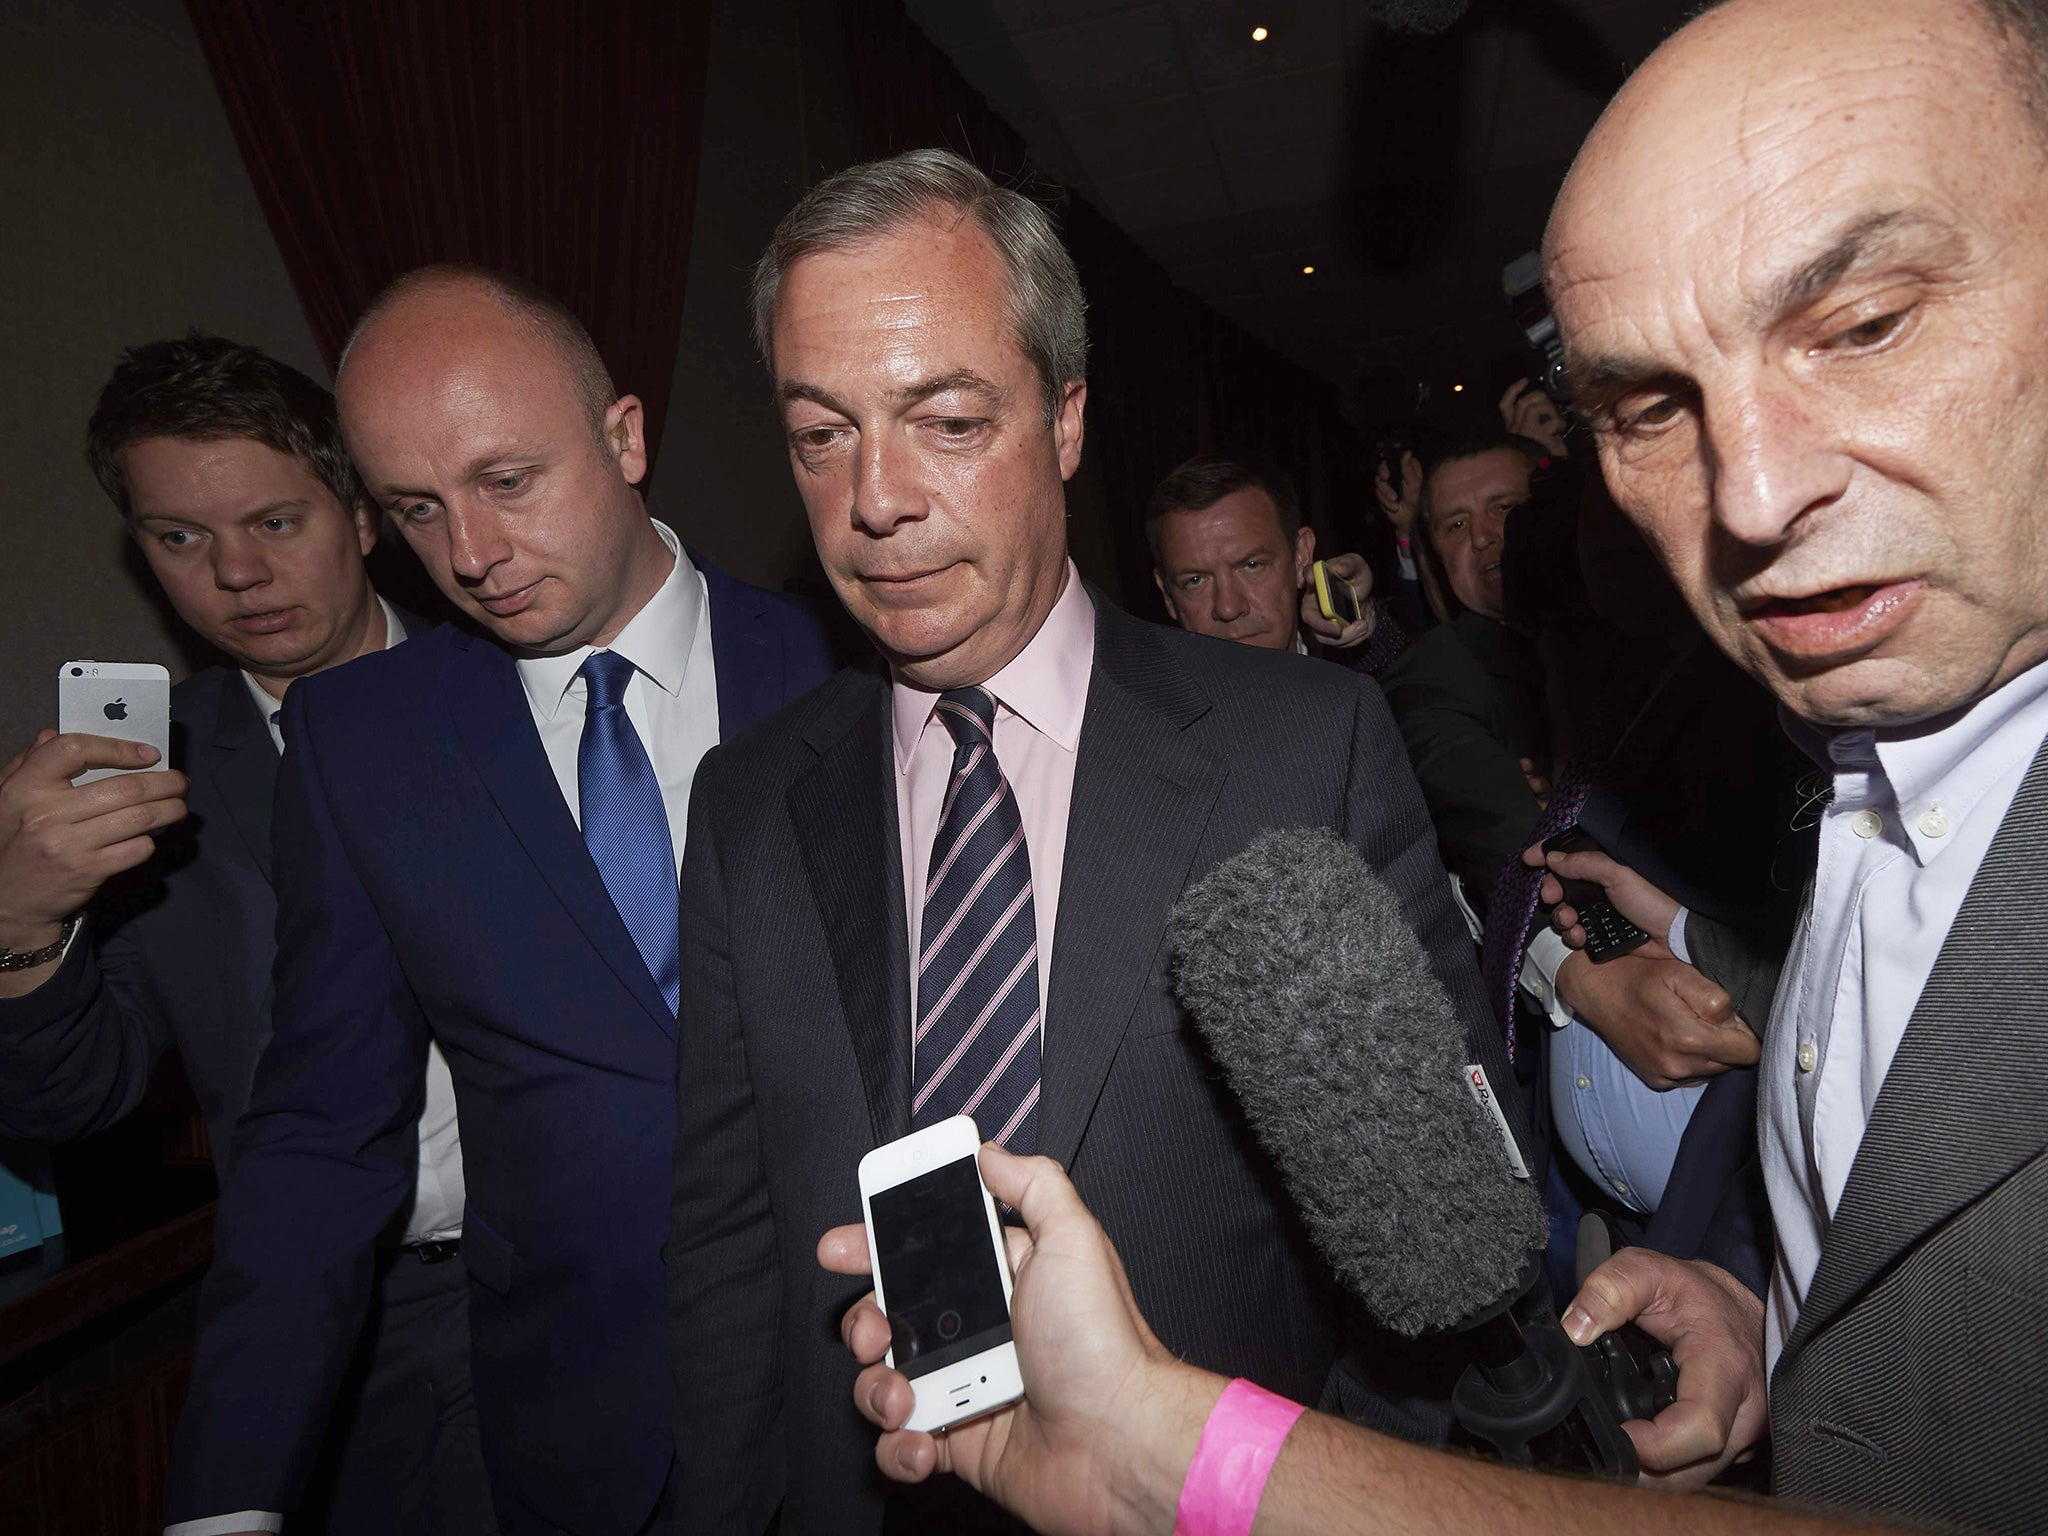 Farage kept the promise he made that he would quit the Ukip leadership if he failed to win a seat, but his resignation was not accepted